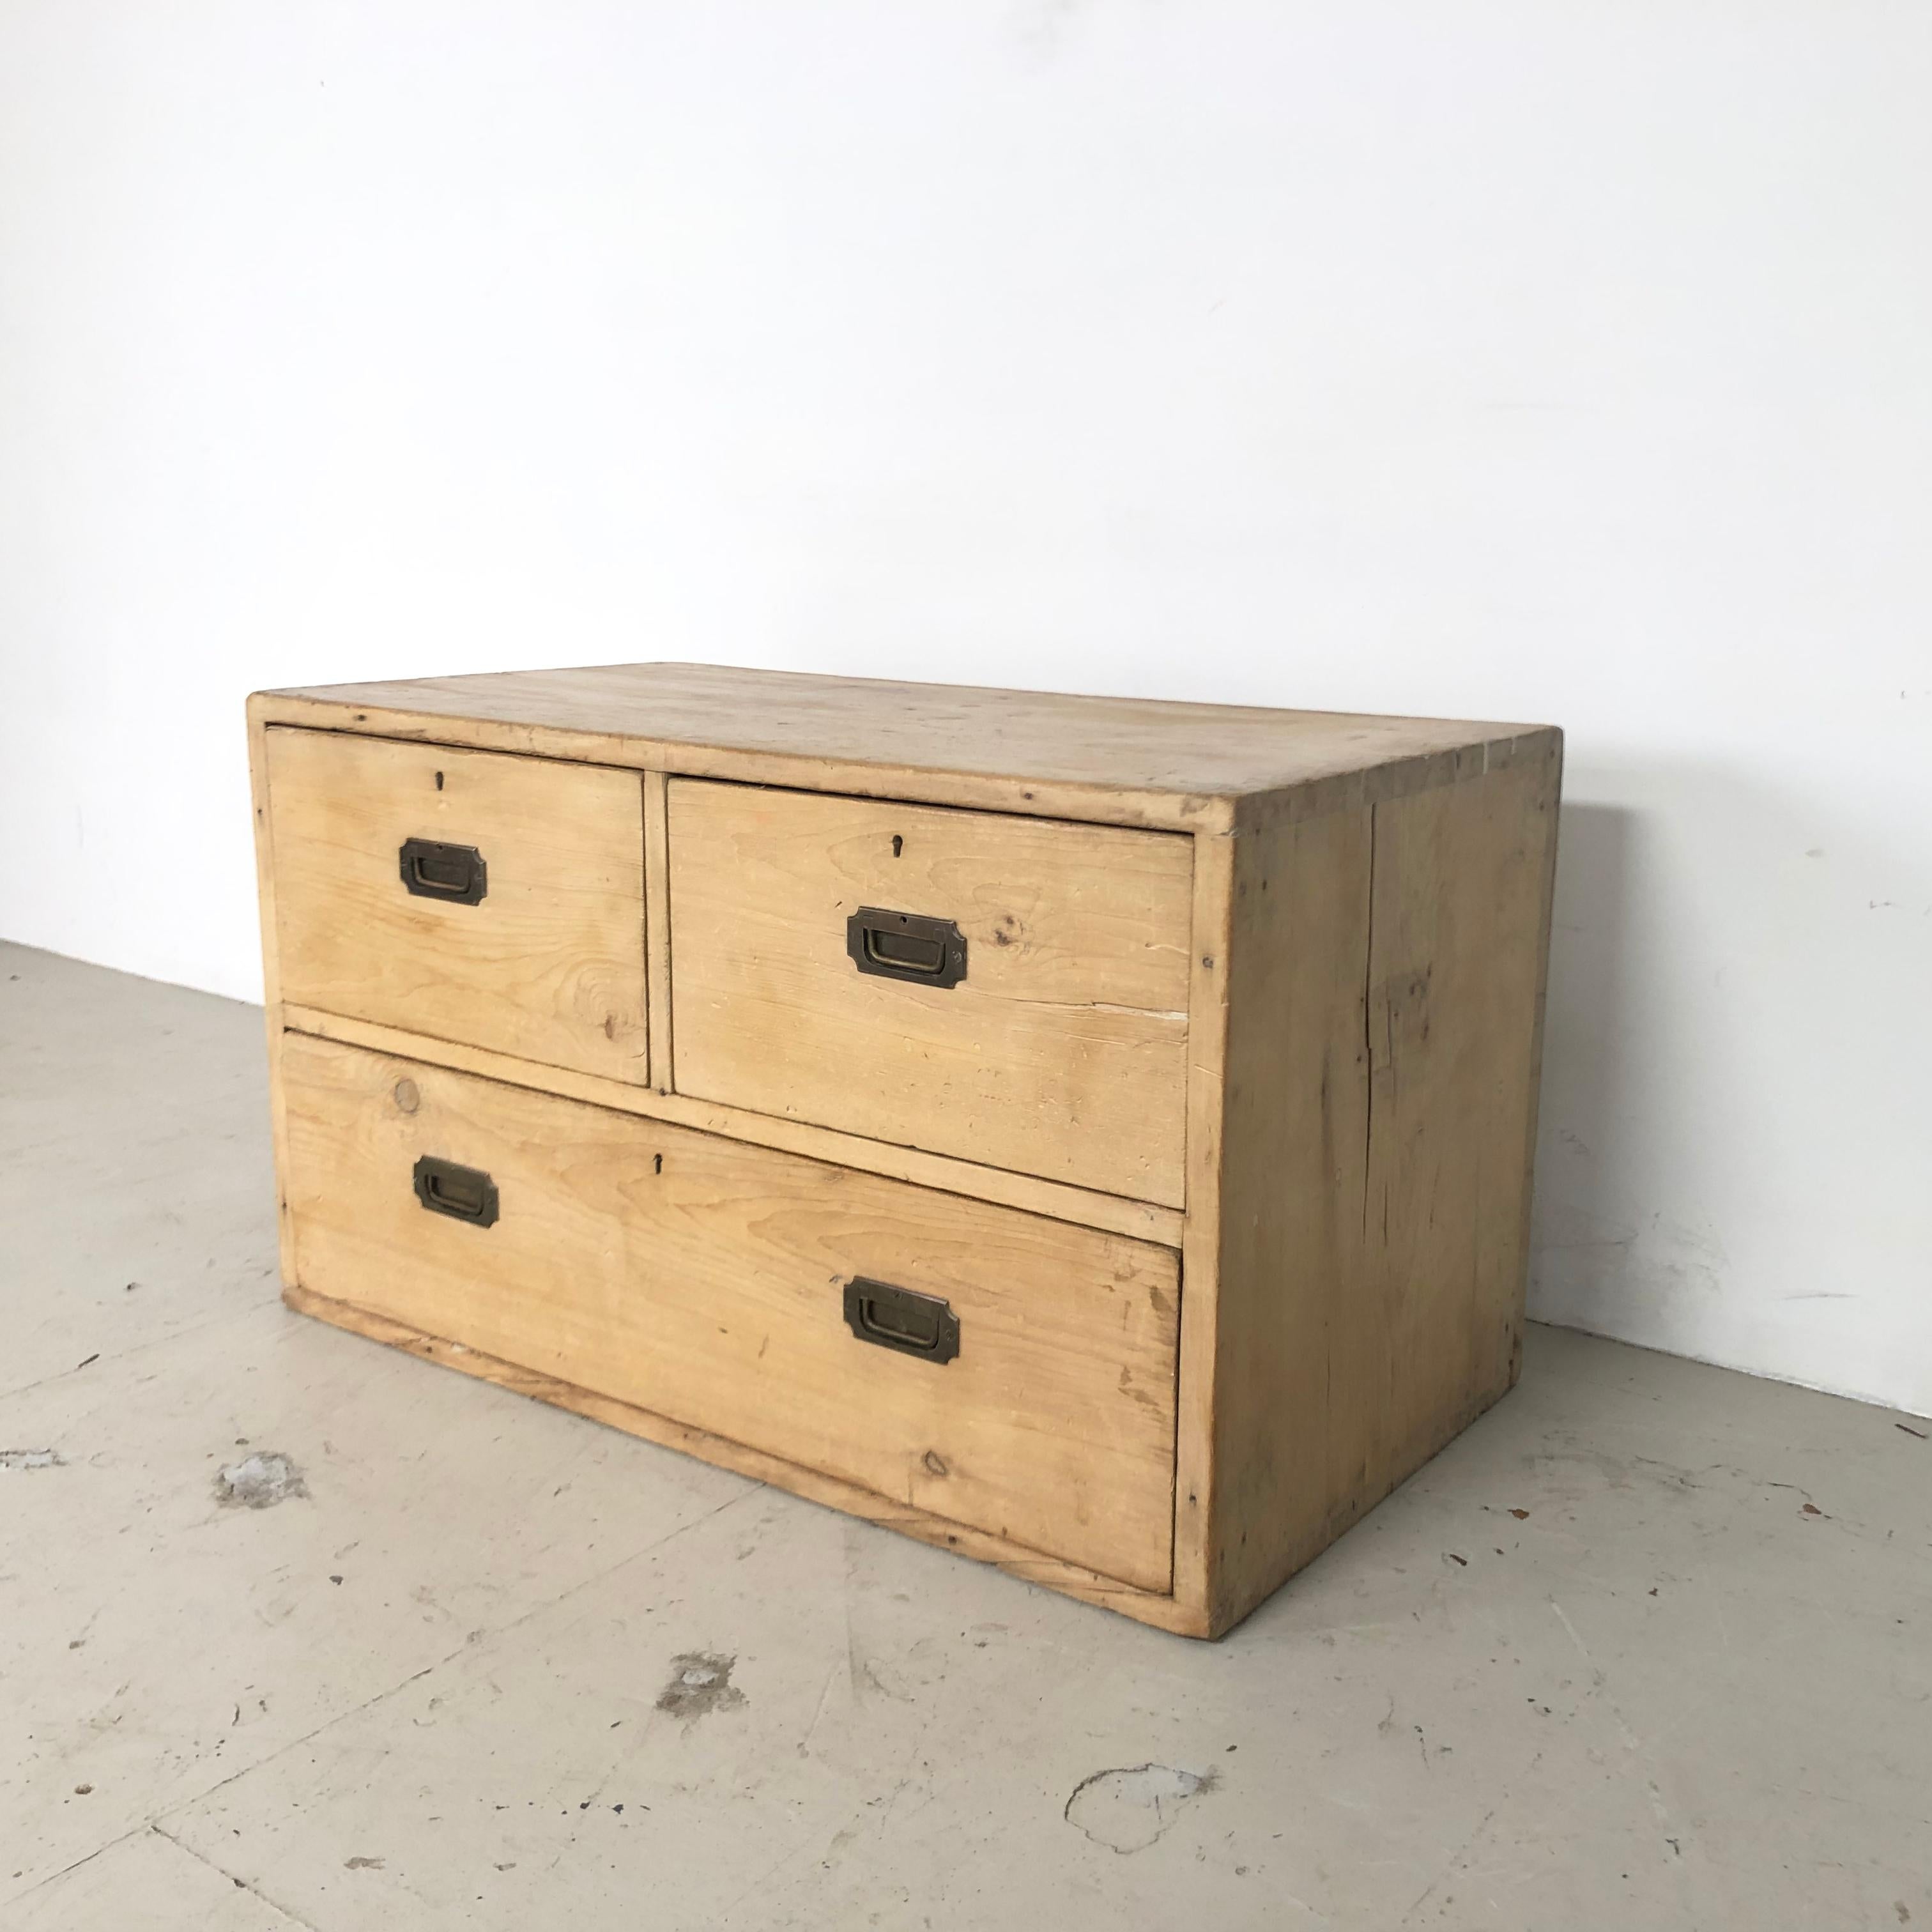 Lovely 1930s haberdashery shop unit / chest.

Offers lots of storage with 3 good deep drawers all with original draughtsman's handles and dovetail joints.

In good vintage condition. Some scuffs and nicks here and there, but nothing that